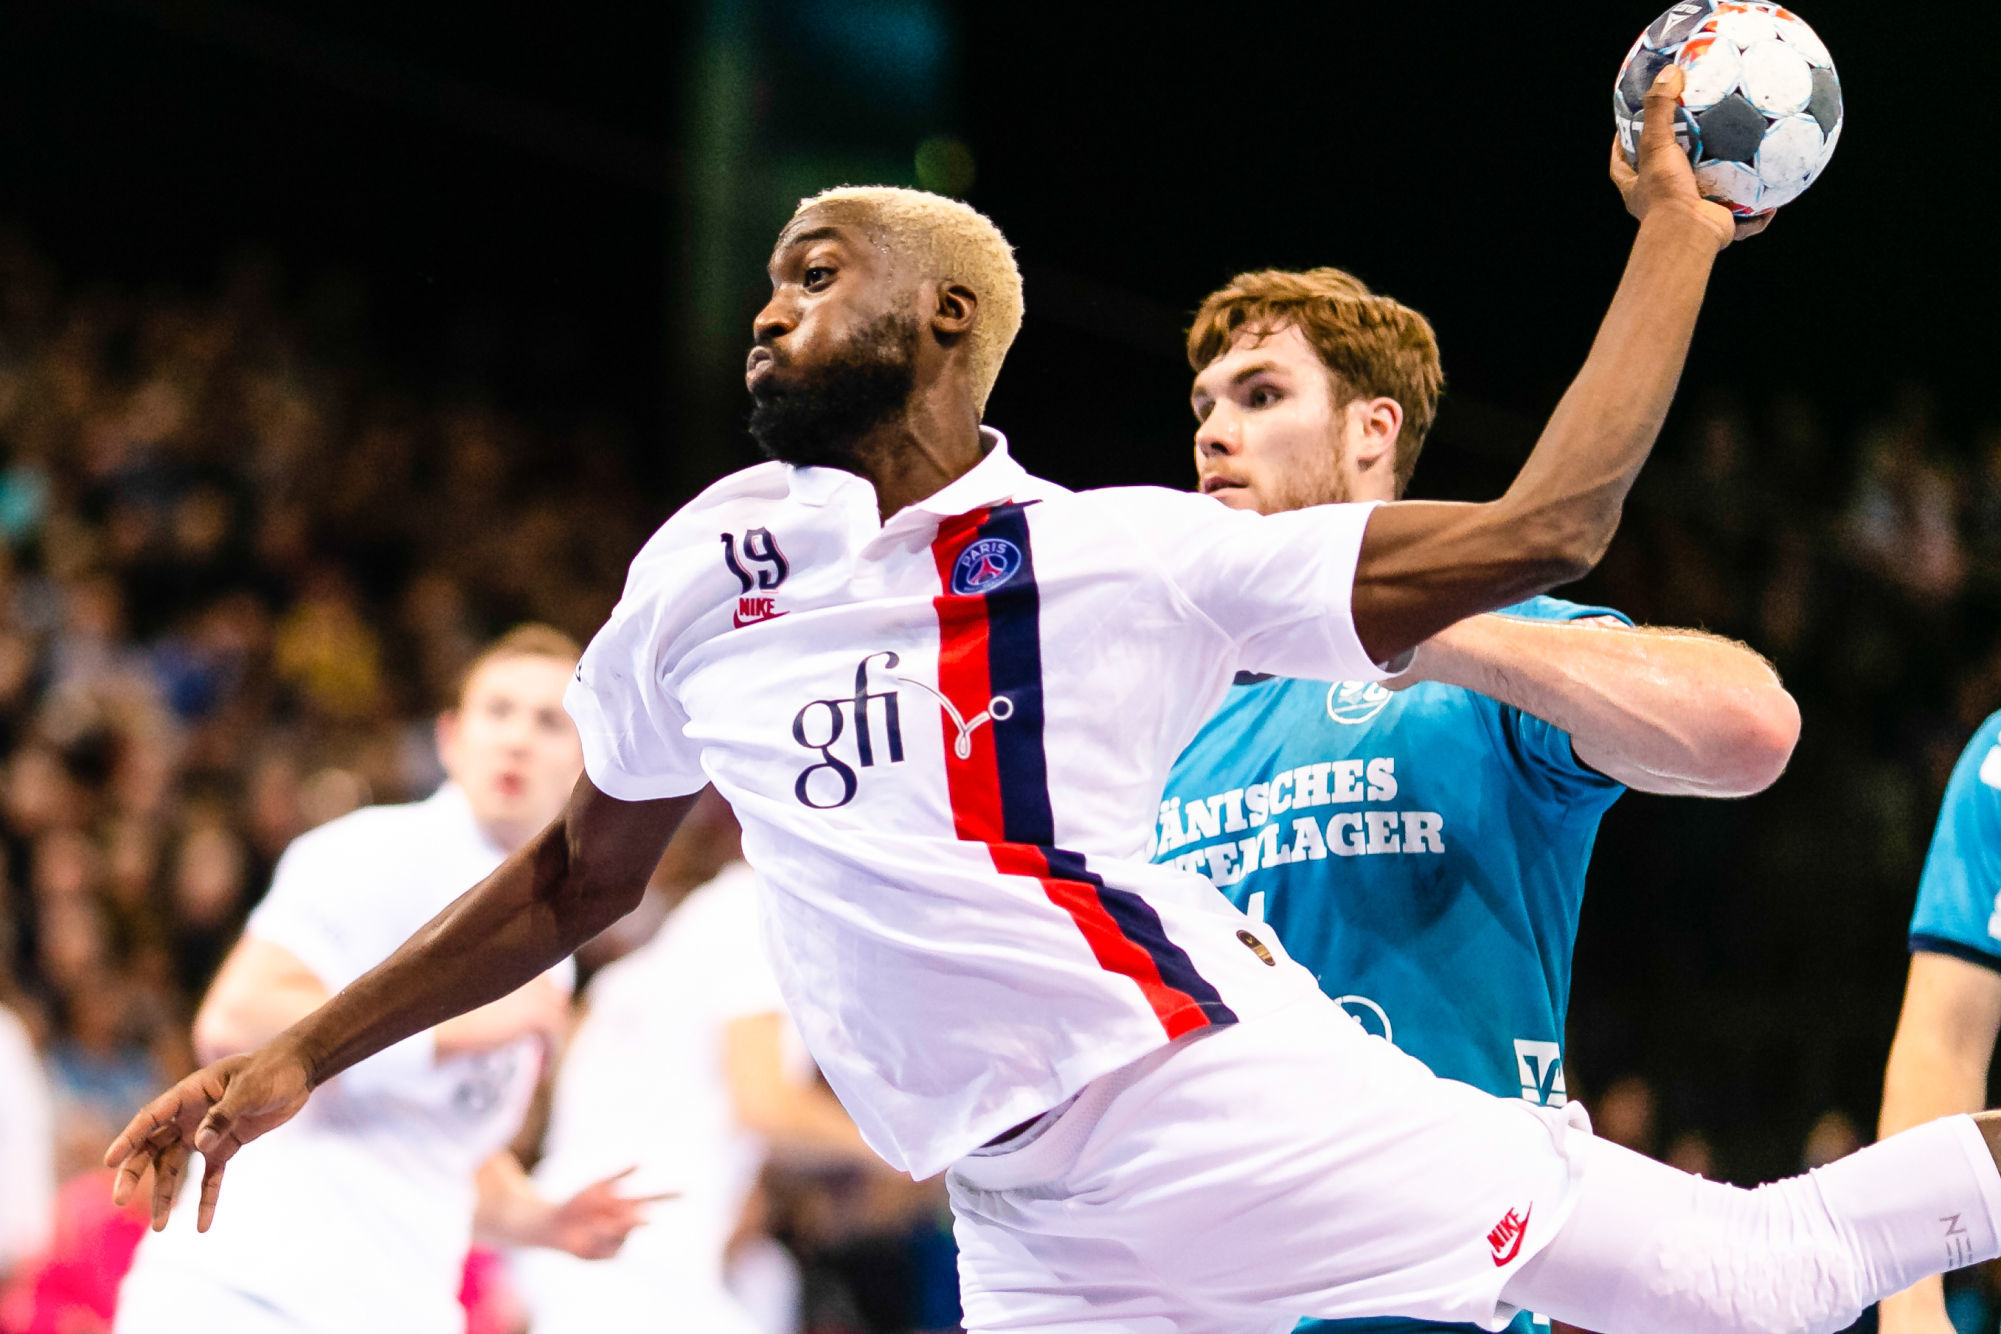 06 November 2019, Schleswig-Holstein, Flensburg: Handball: Champions League, SG Flensburg-Handewitt - Paris St. Germain, Group stage, Group A, 7th matchday. Luc Abalo (l) of Paris throws Johannes Golla at the goal in front of Flensburg. Photo: Frank Molter/dpa 

Photo by Icon Sport